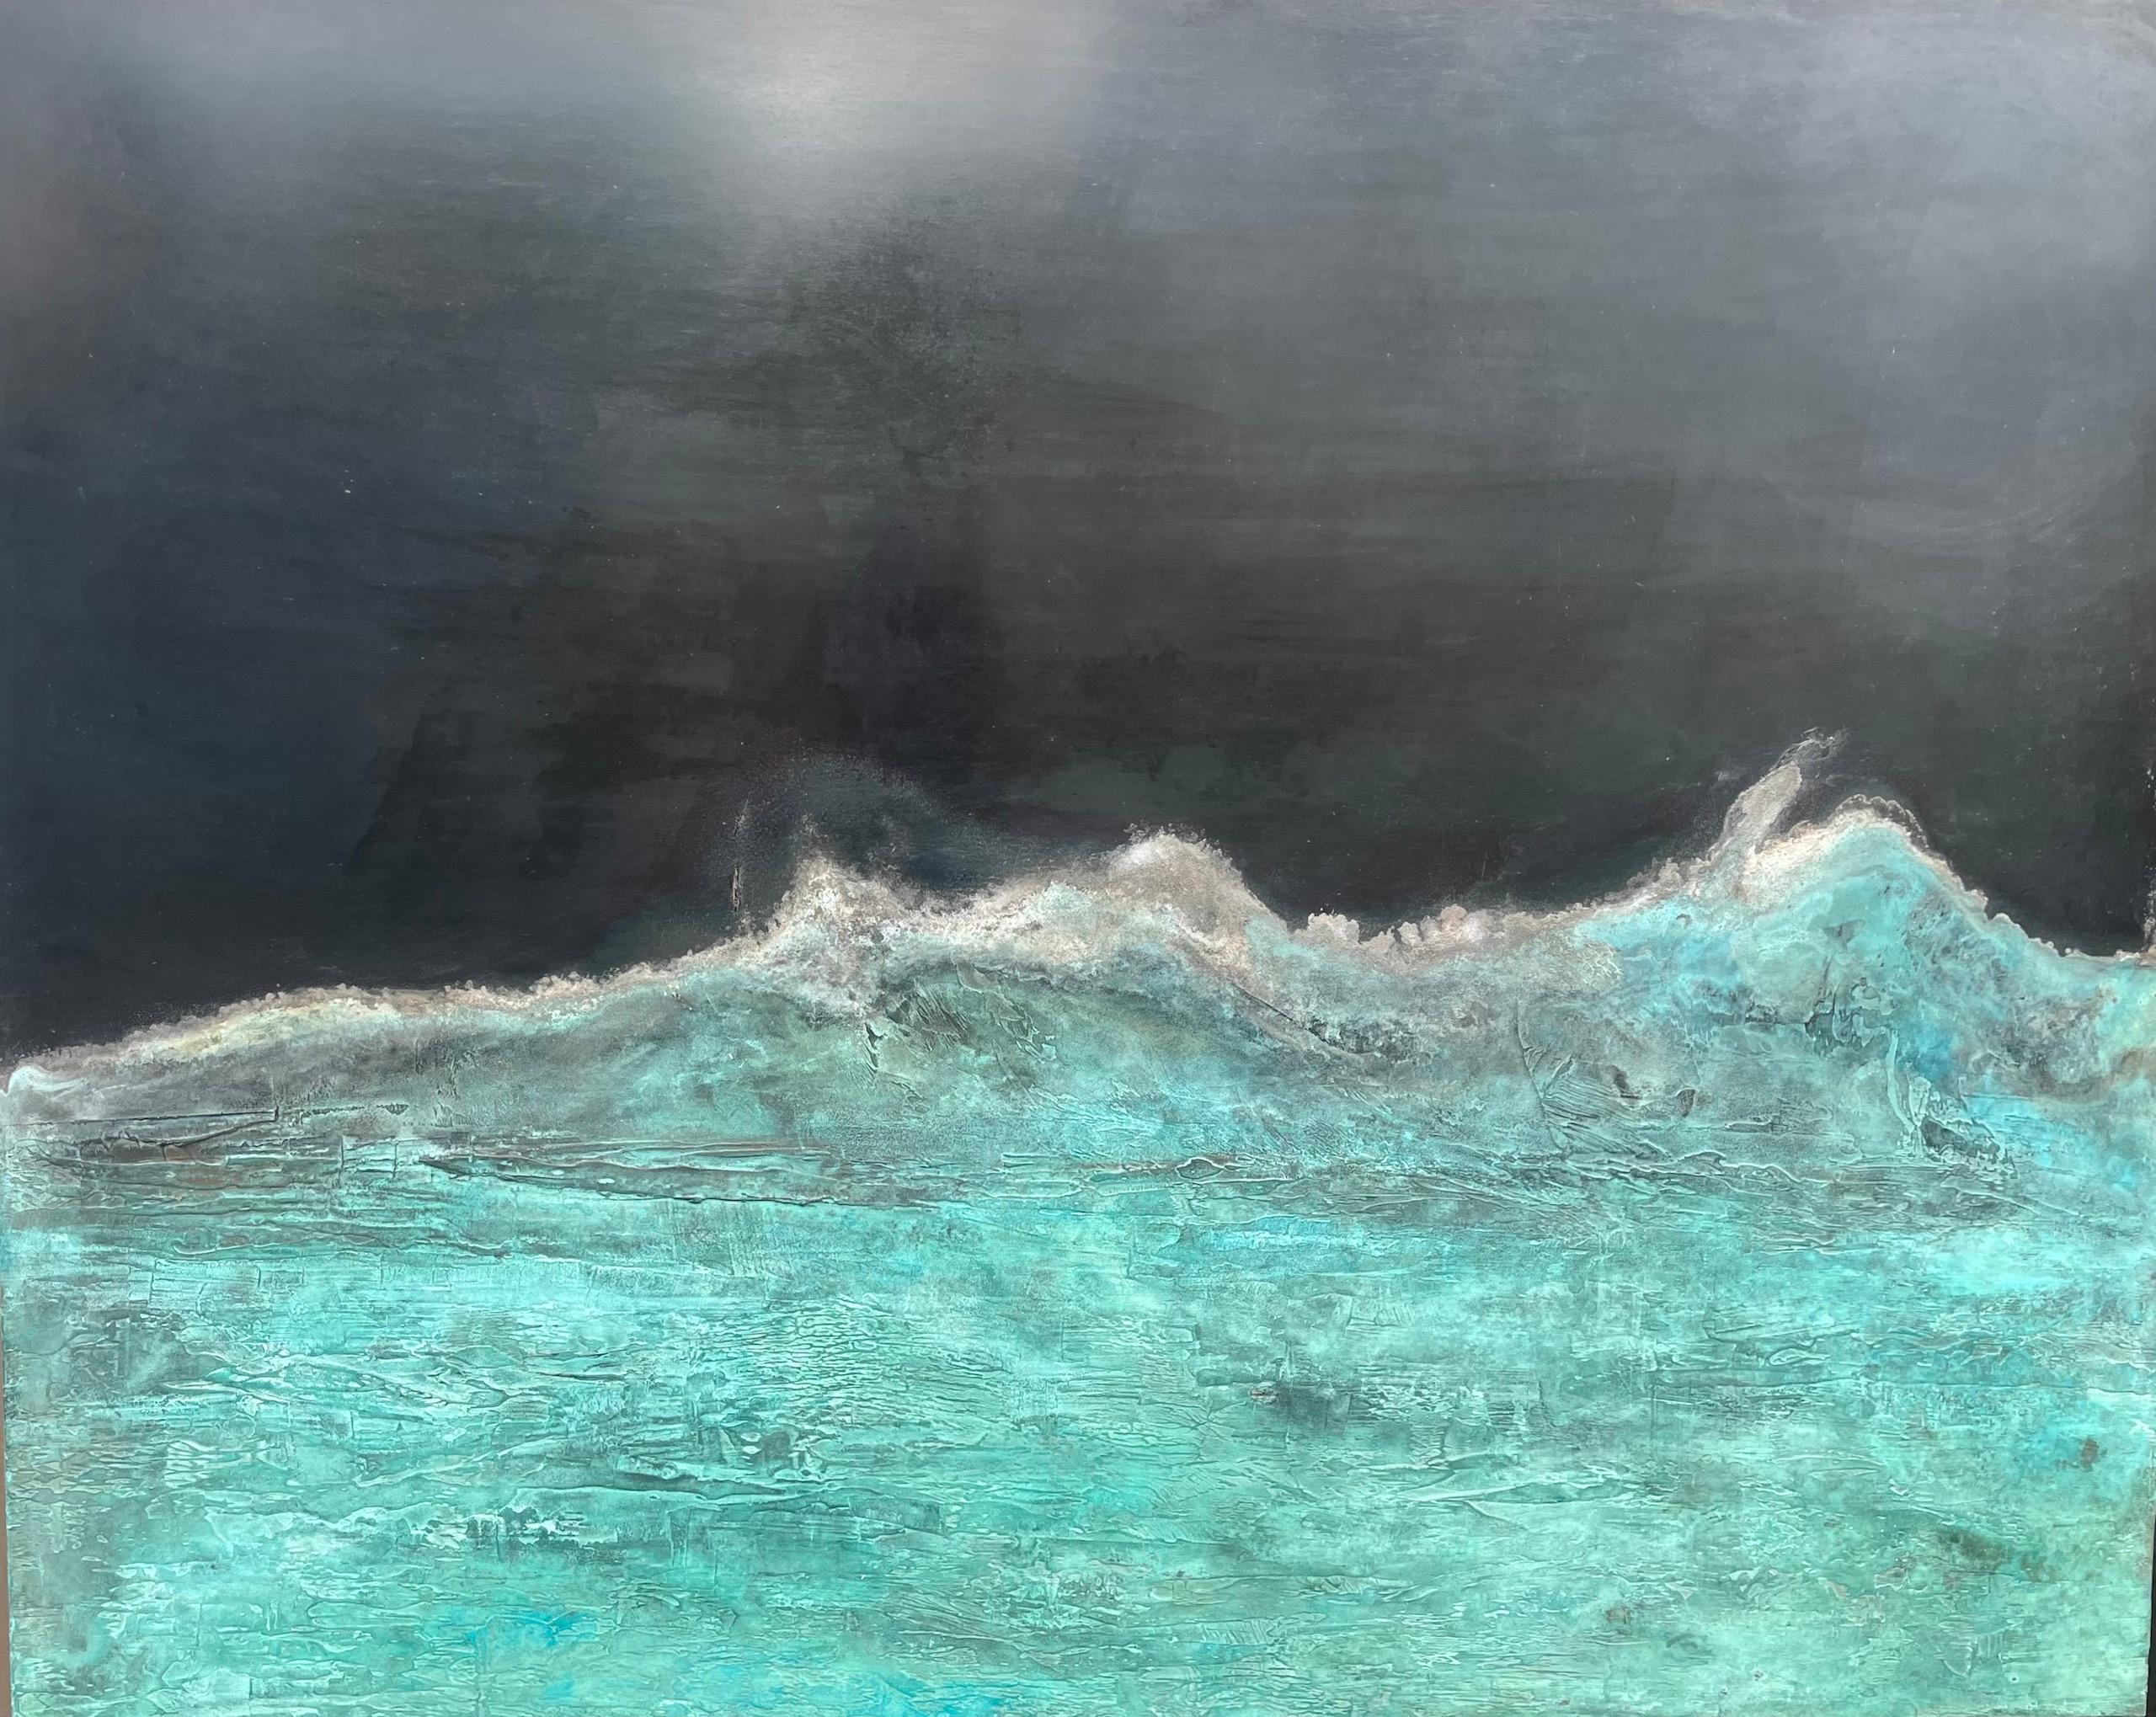 Frost horizon on Enceladus II is a unique painting by French contemporary artist Frédérique Domergue. This painting is made with oxidized zinc and bronze leaves on aluminium panel, patina fixed with beeswax, dimensions are 80 × 100 cm (31.5 × 39.4